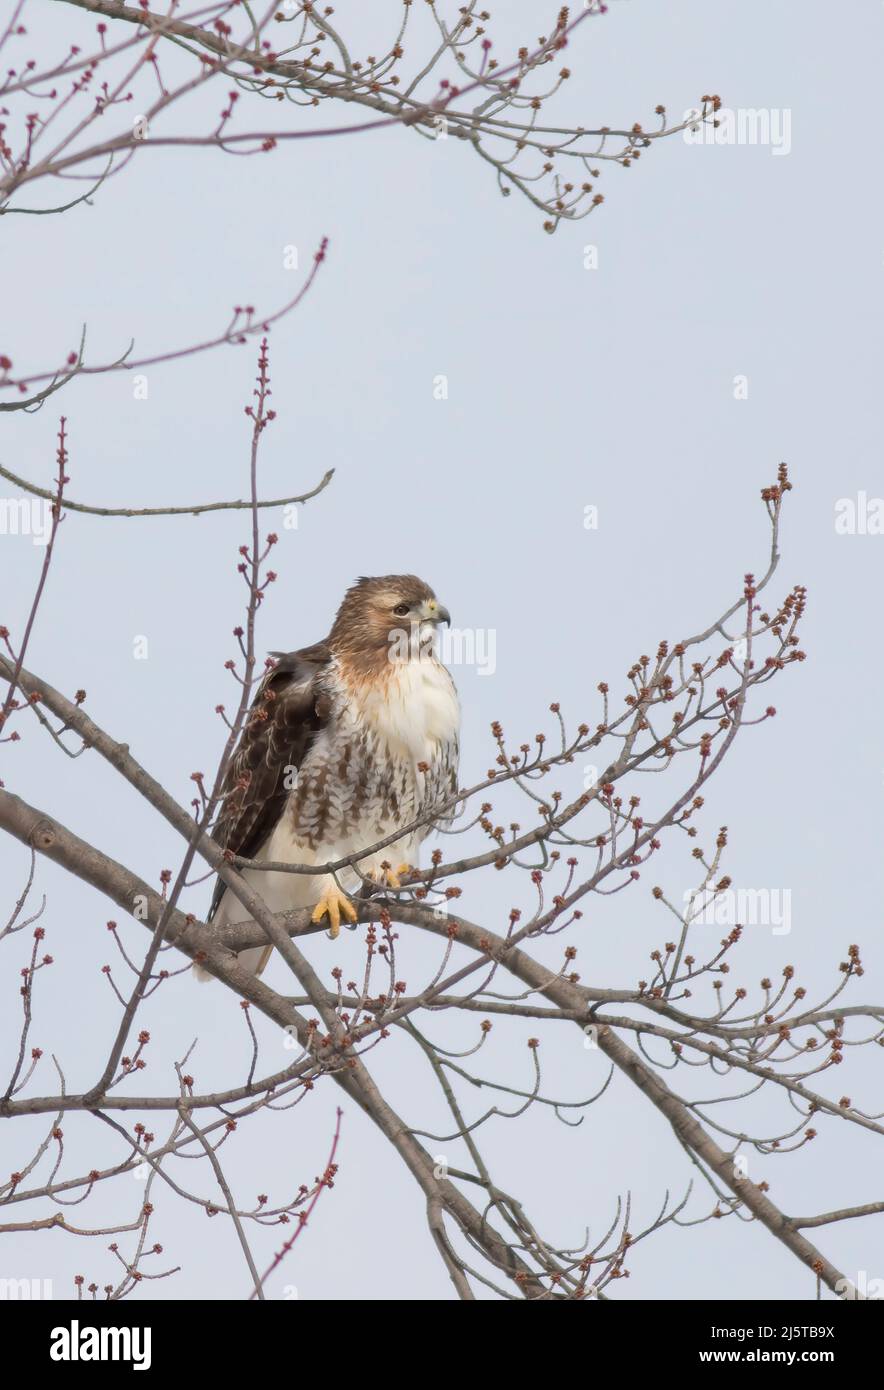 Red-tailed hawk Buteo jamaicensis perched high in a tree hunting in Canada Stock Photo